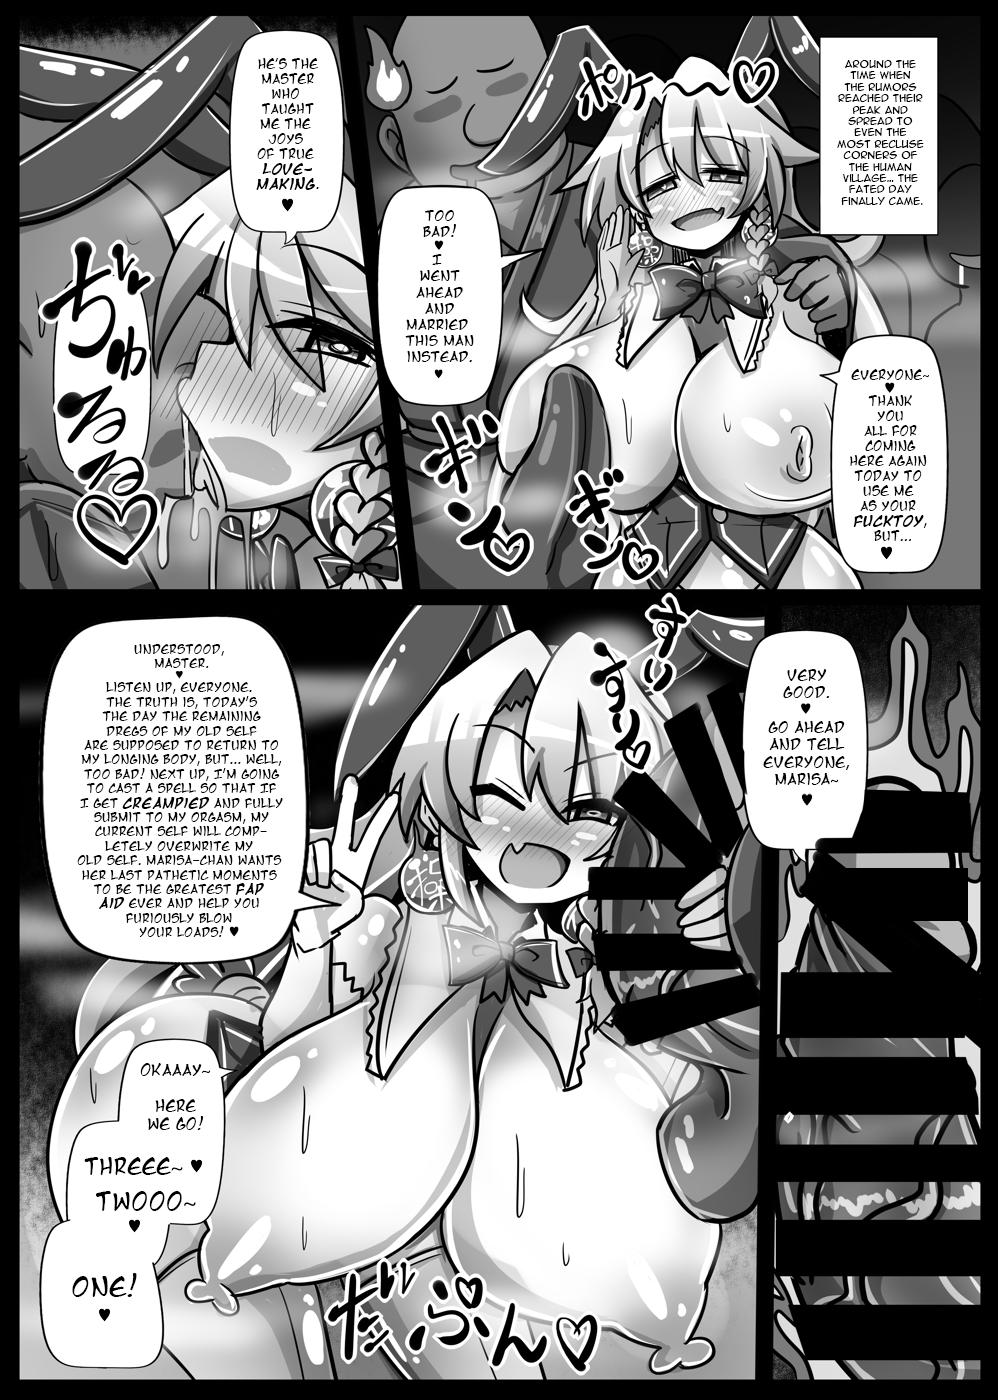 Shemale Porn Paradise of Fake Lovers The Brainwashing of Young Maidens Story 2 - Touhou project Gays - Page 9